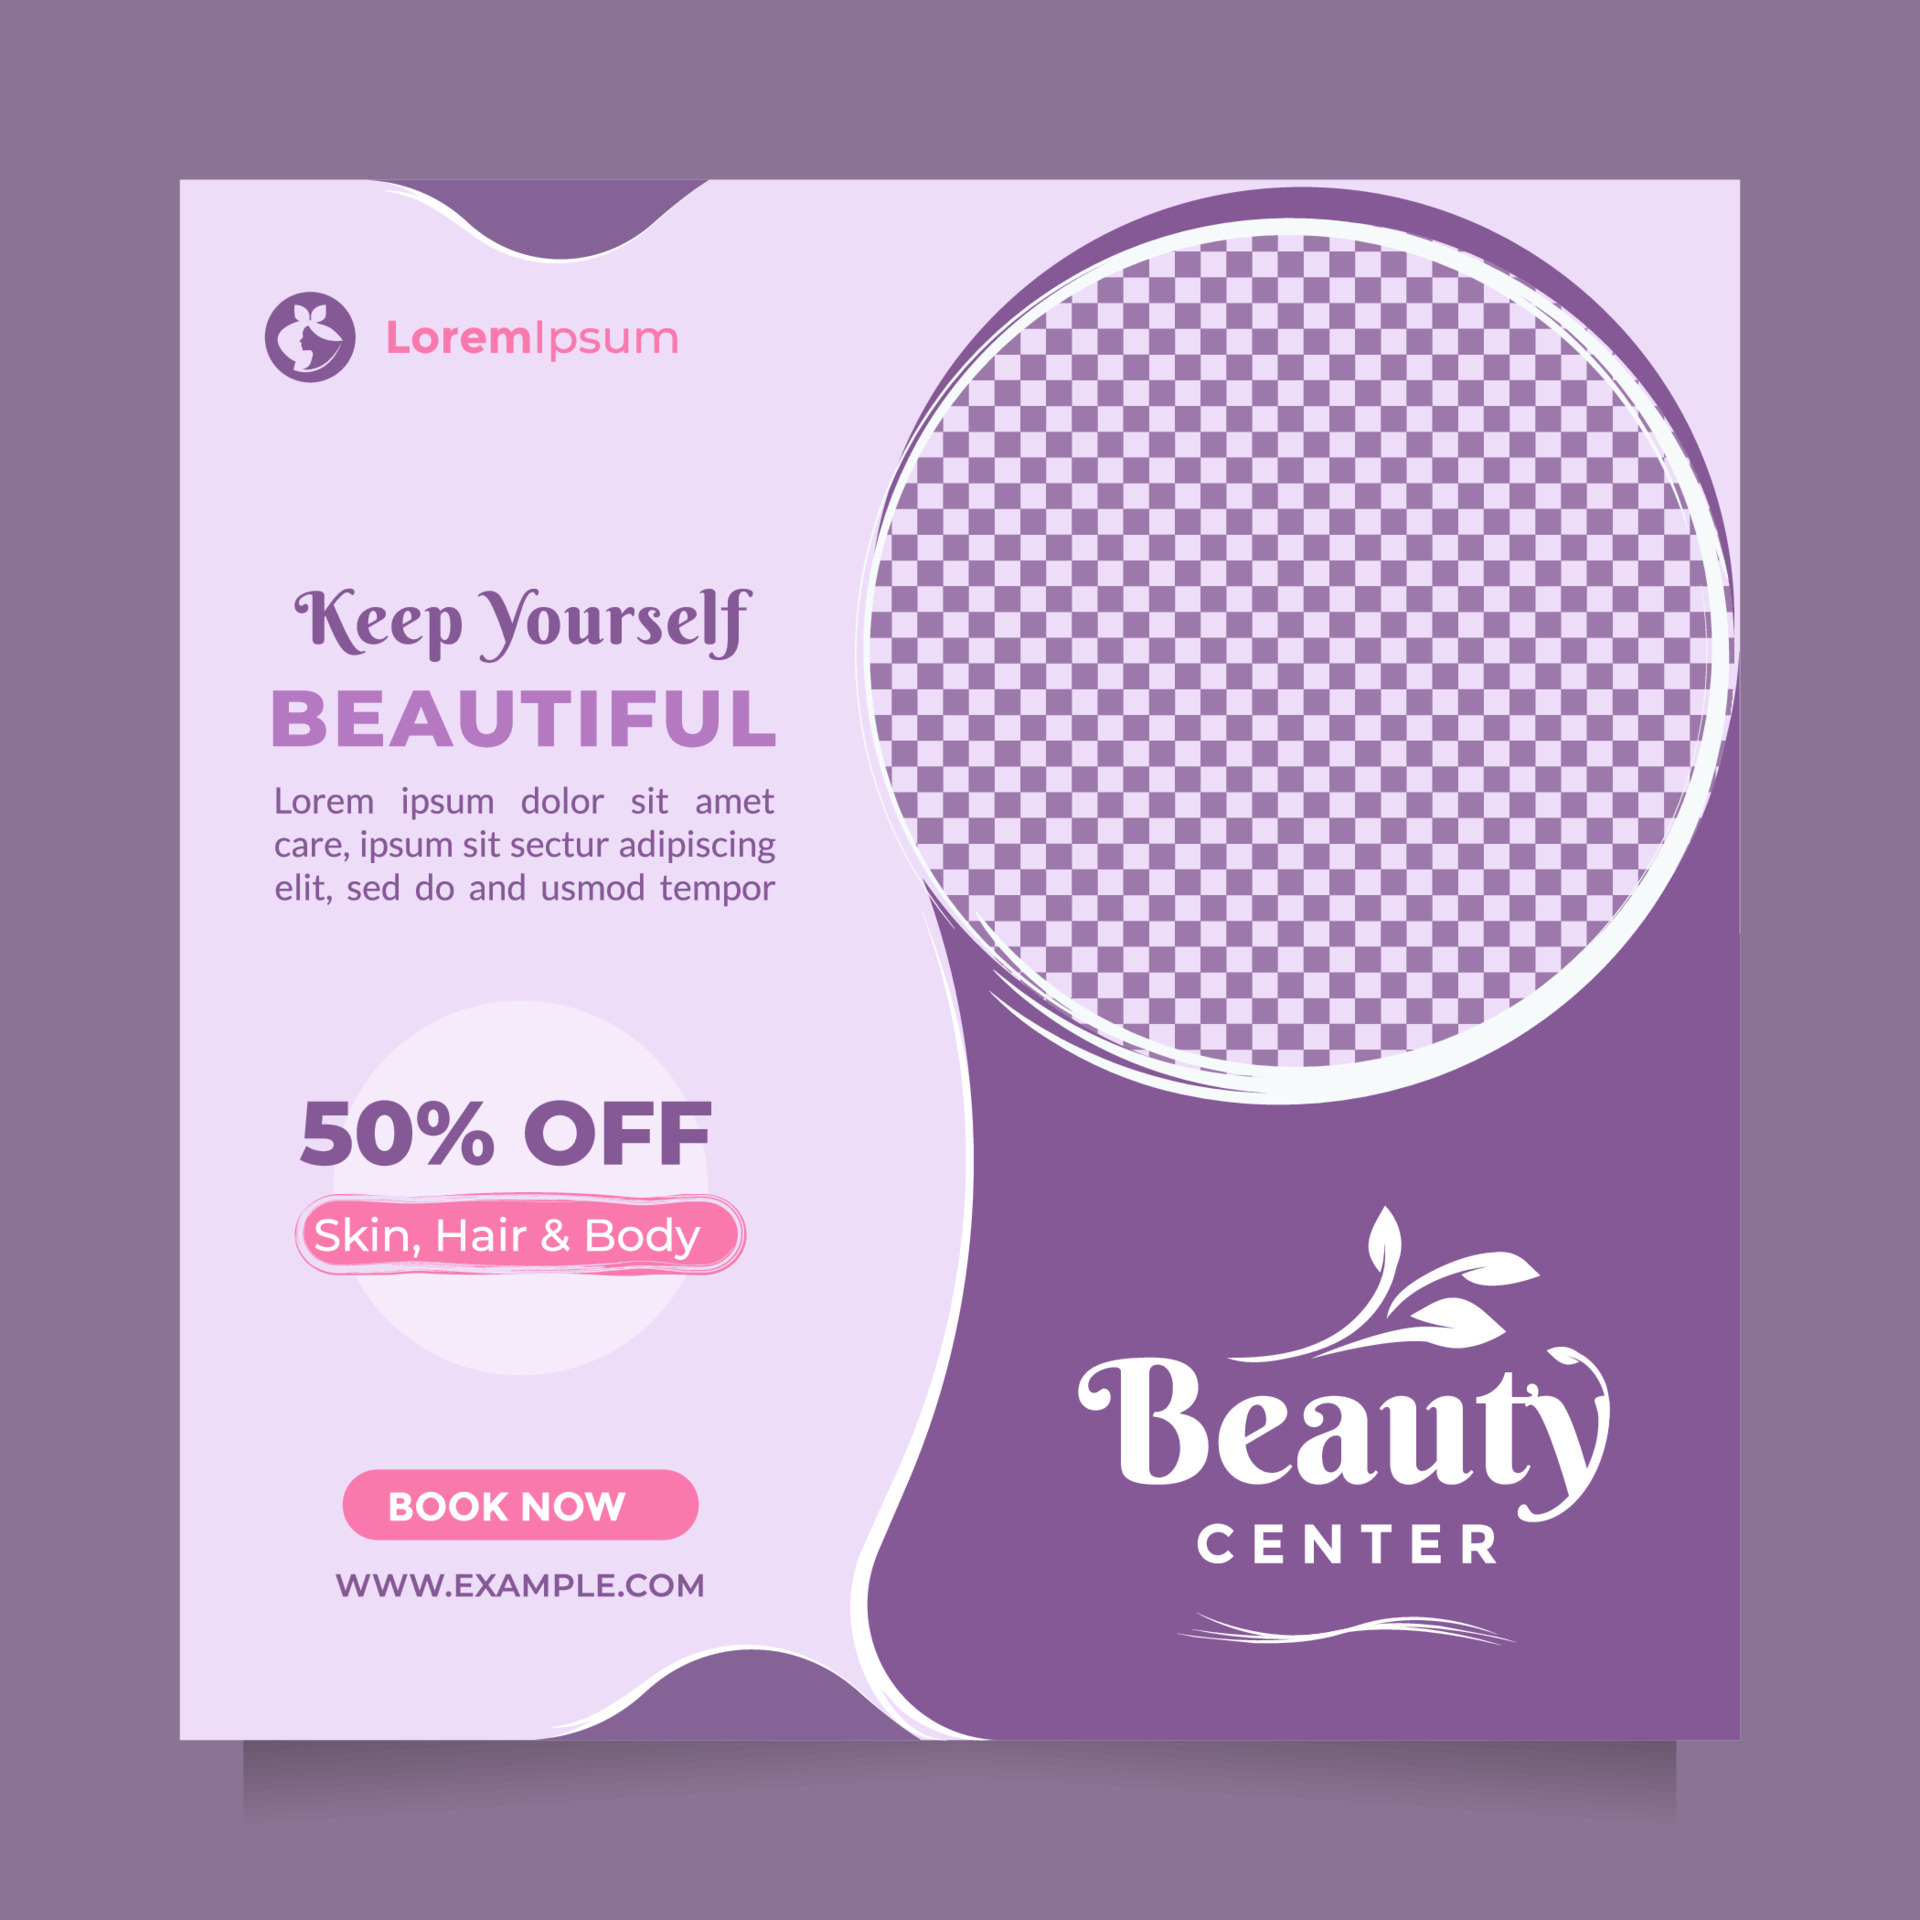 Beauty care service concept social media post and banner template. Creative  promotion design concept of professional hair spa, hair mask, hair style,  cosmetic sale or promotion, skin treatment, etc 12392174 Vector Art